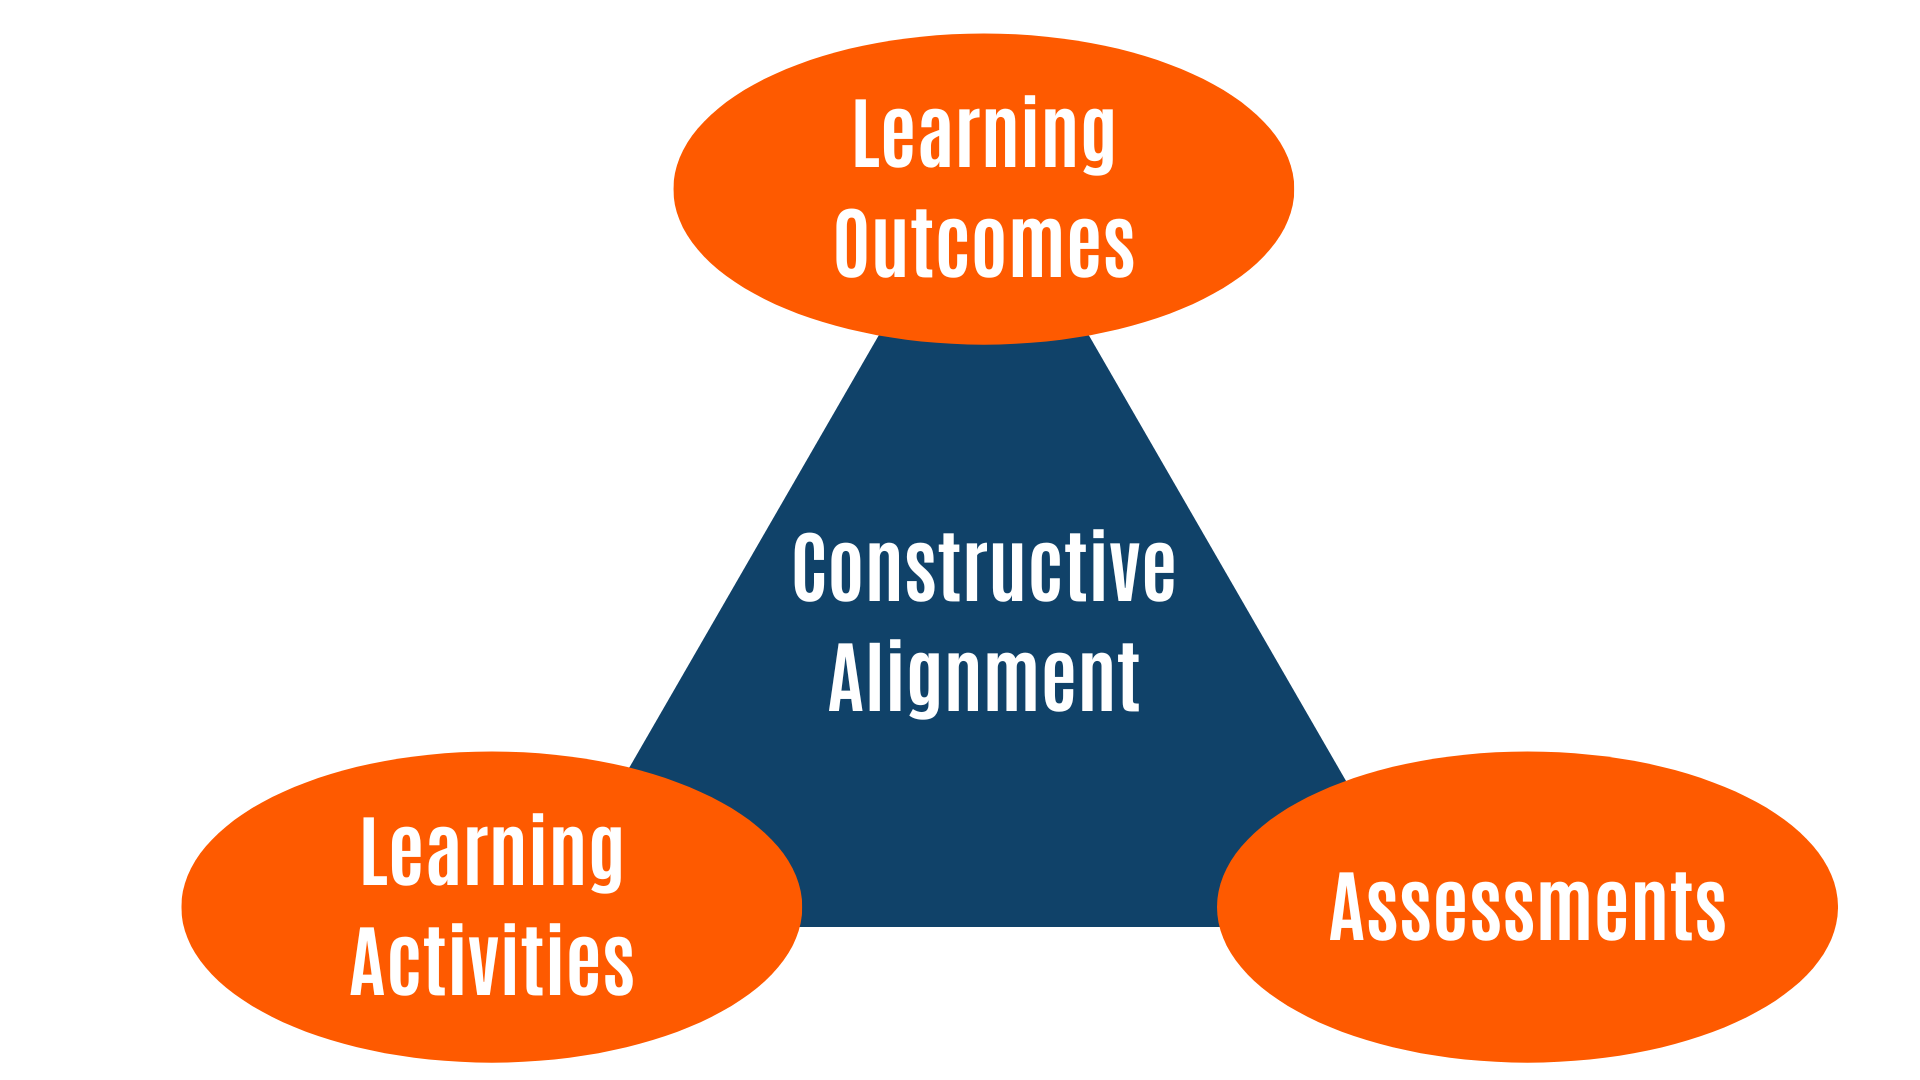 A Constructive Alignment Diagram, a Triangle showing Learning Outcomes, Learning Activities, and Assessments all make up Constructive Alignment